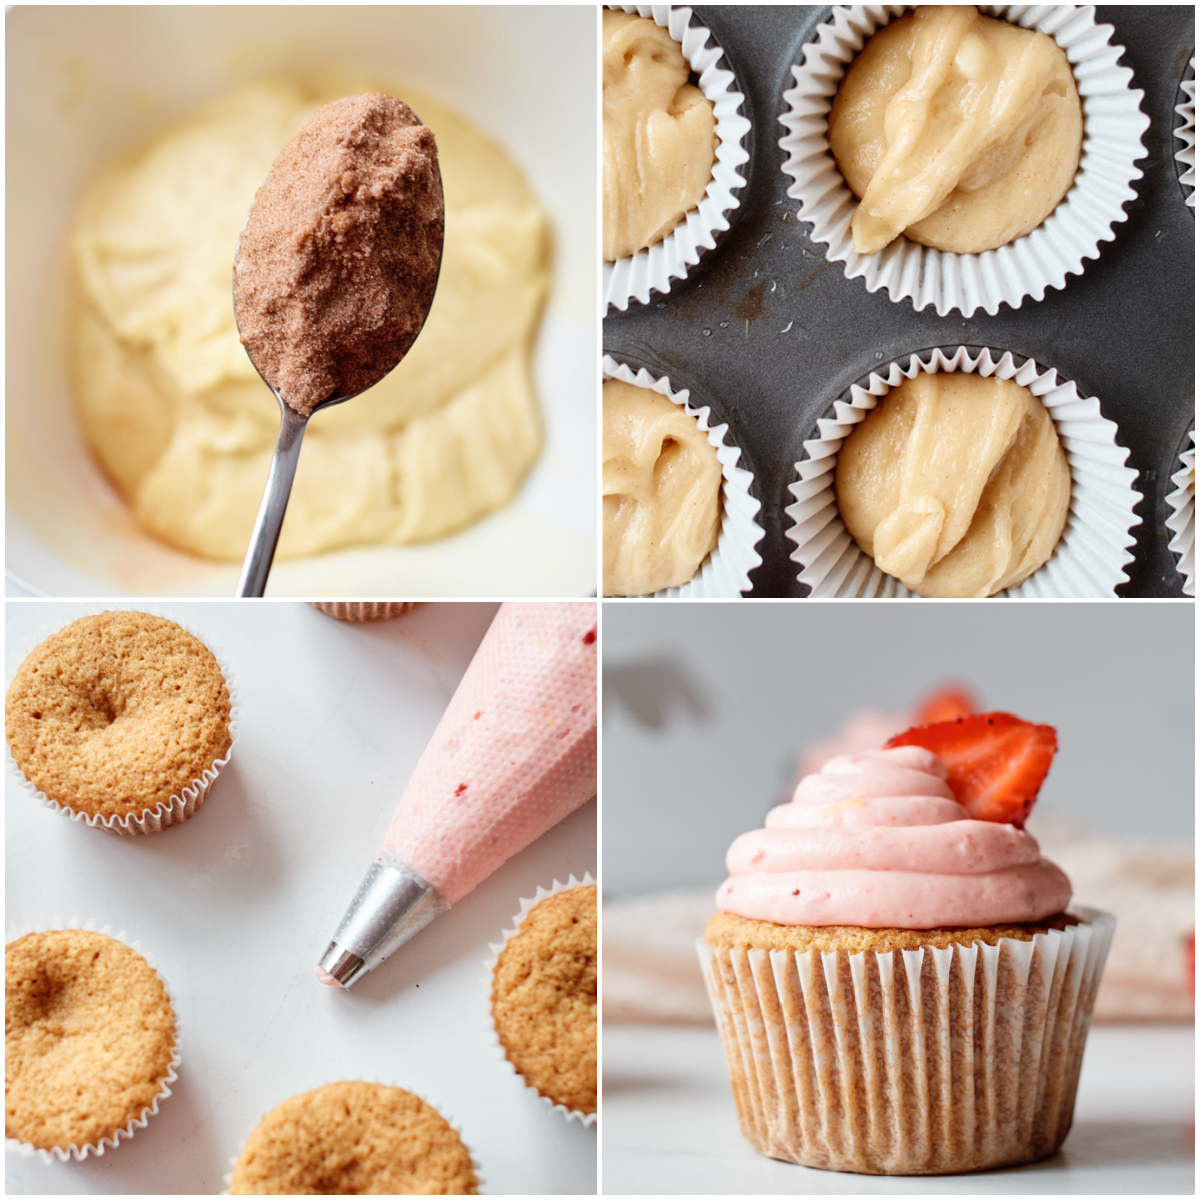 image collage showing the steps for making strawberry churro cupcakes